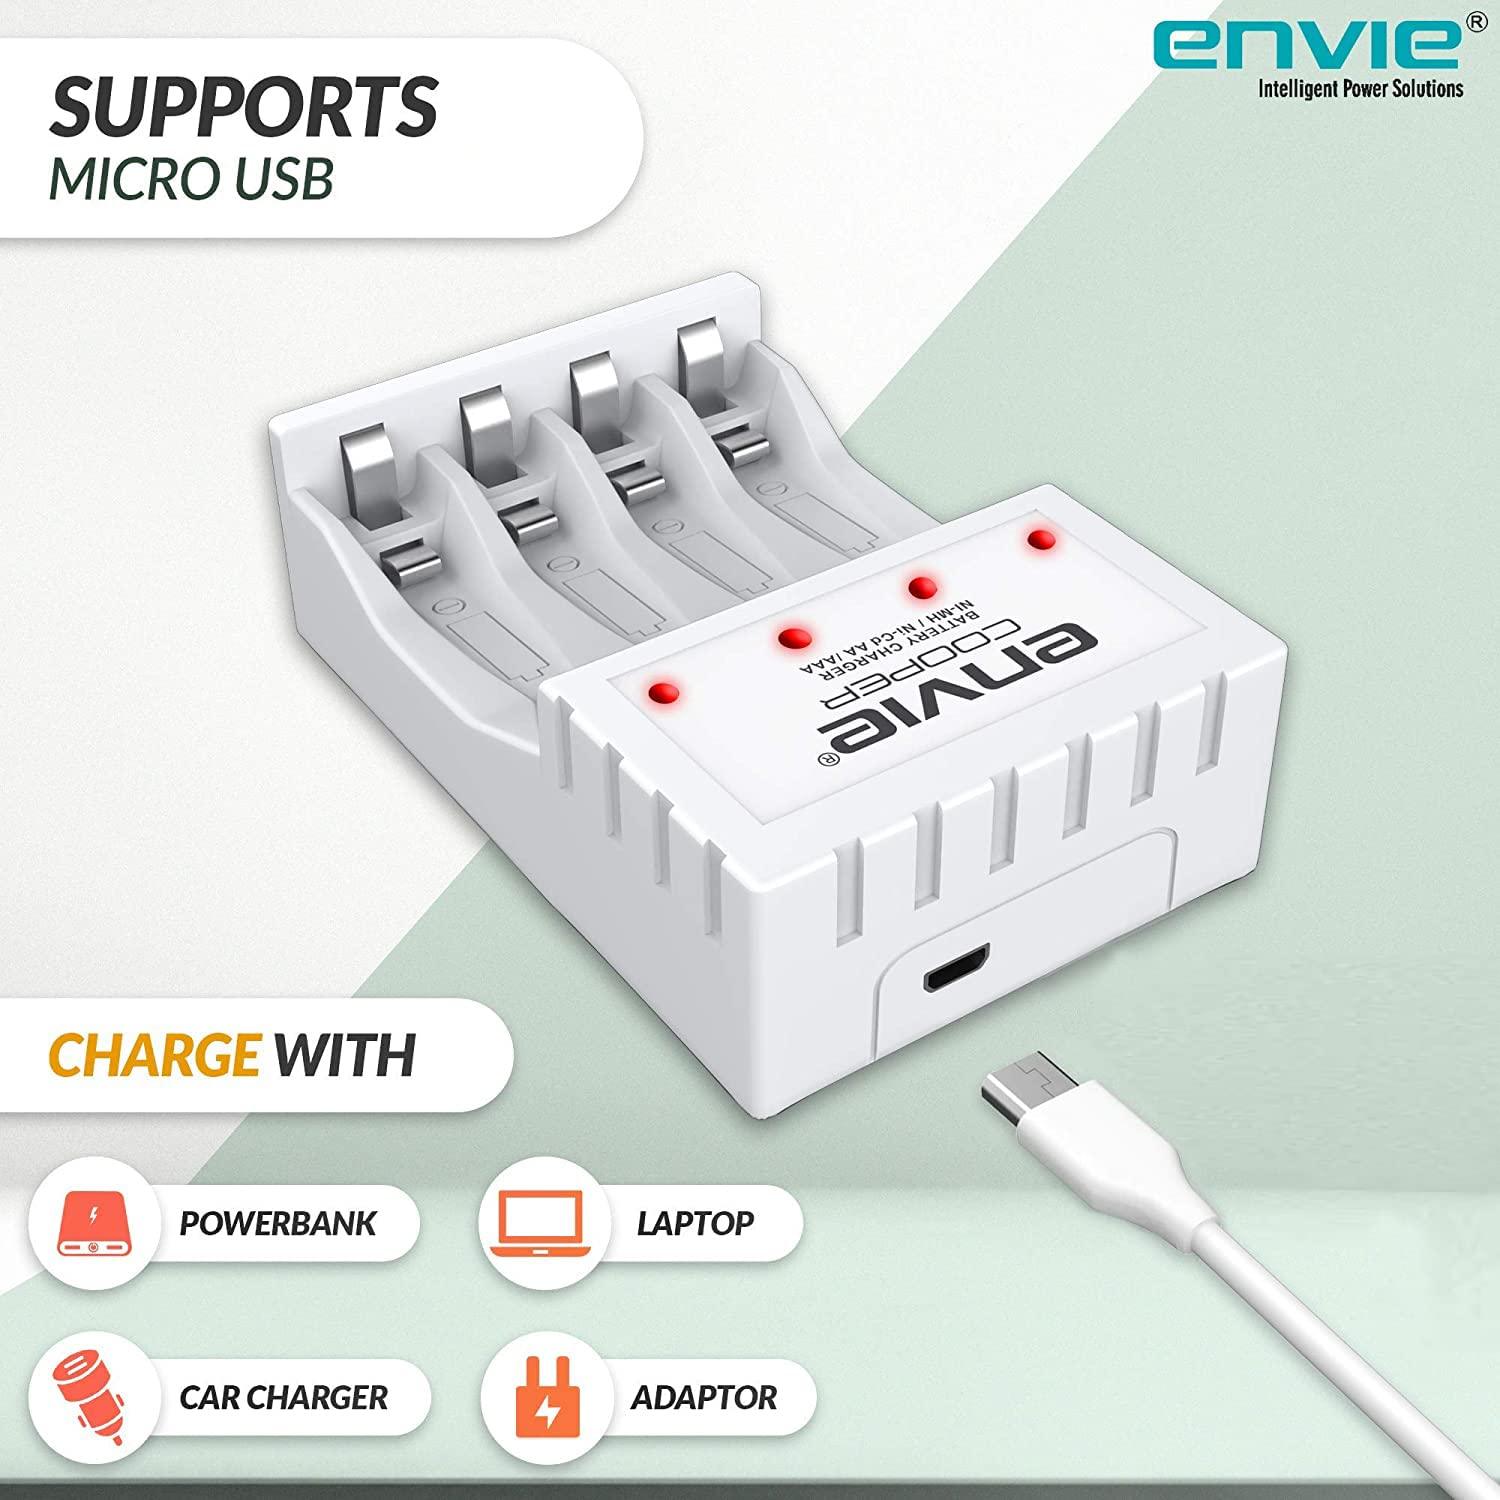 ENVIE (ECR 20 MC+4xAA2800) Standard Rechargeable Battery Charger for AA & AAA Ni-mh/Ni-Cd with 4xAA2800 Rechargeable Batteries - Digitek